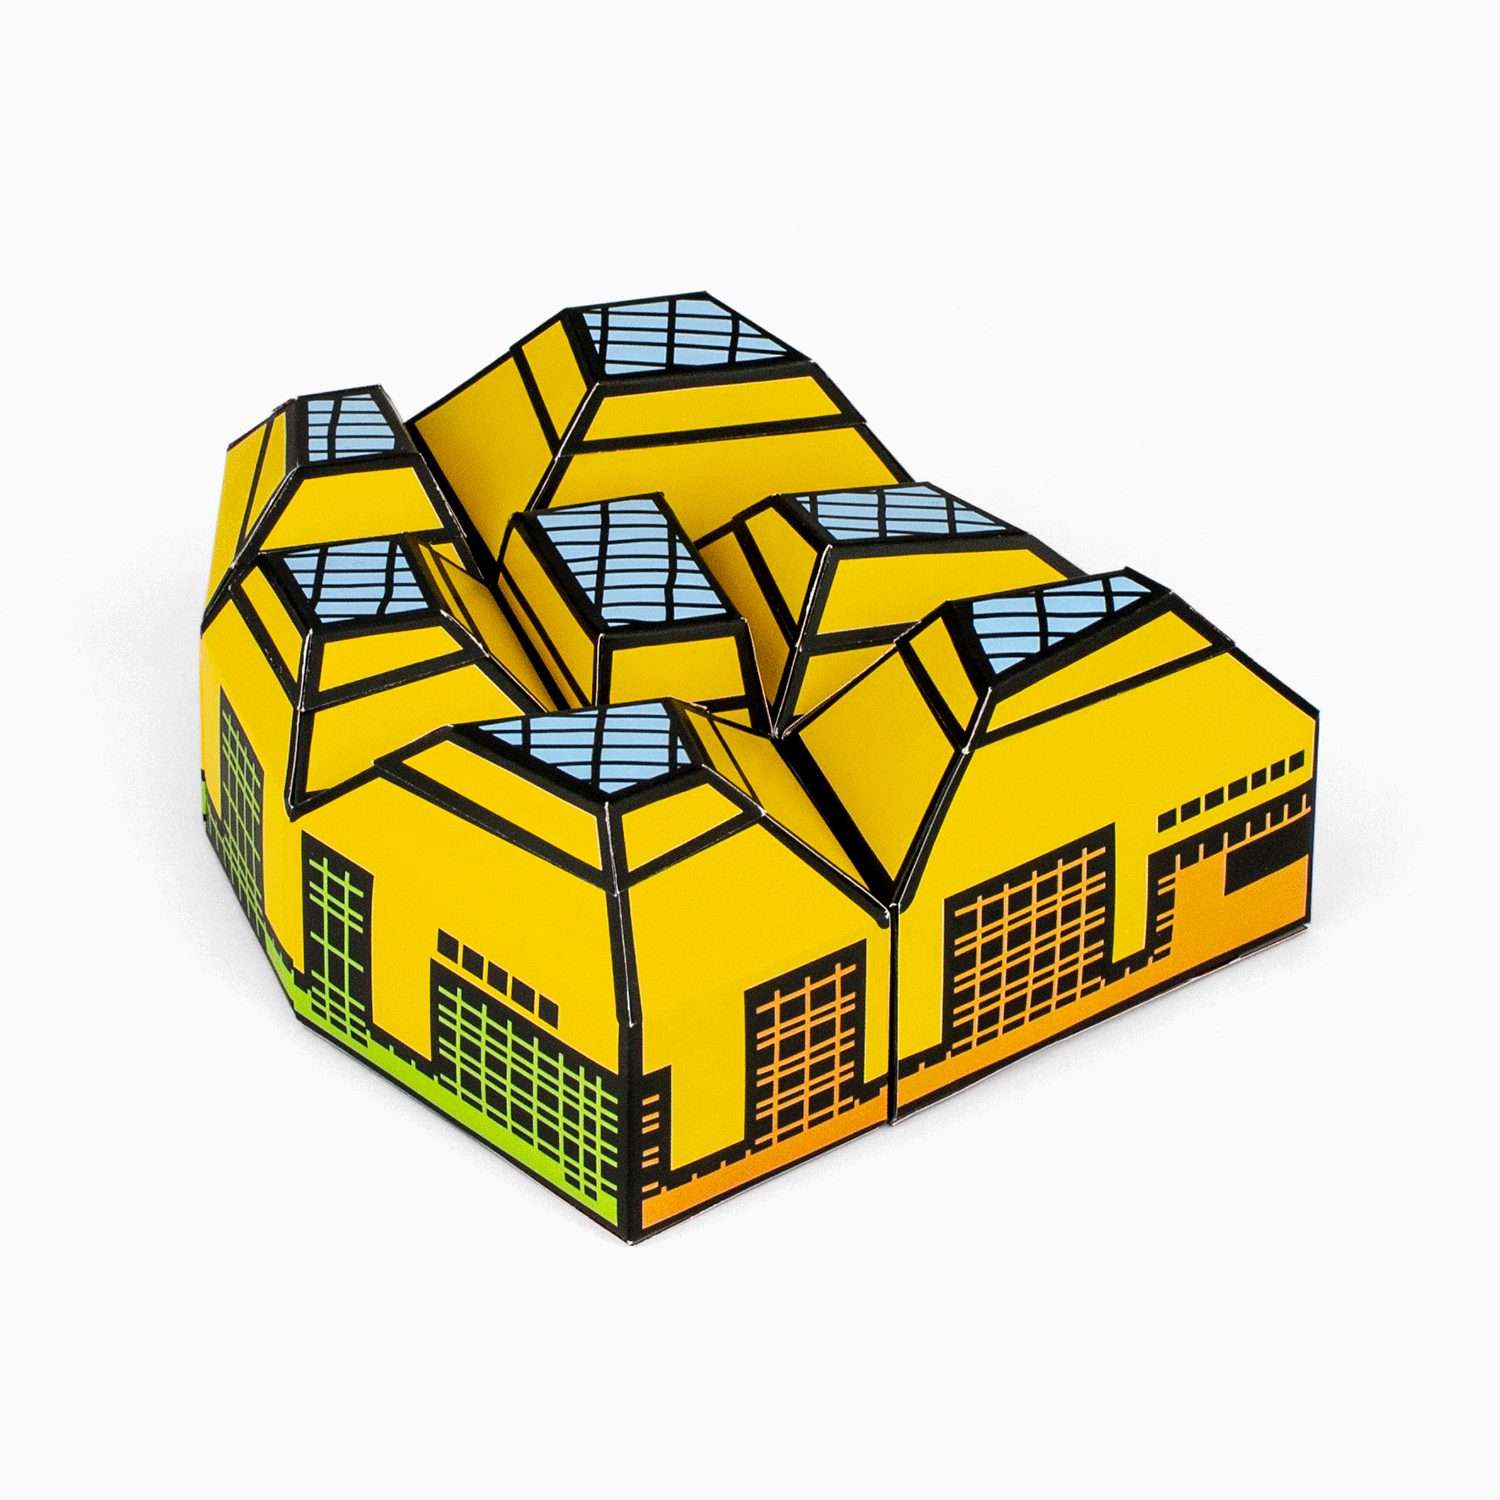 Foxetroo Cut-out Paper Model of The Hive Library in Worcester